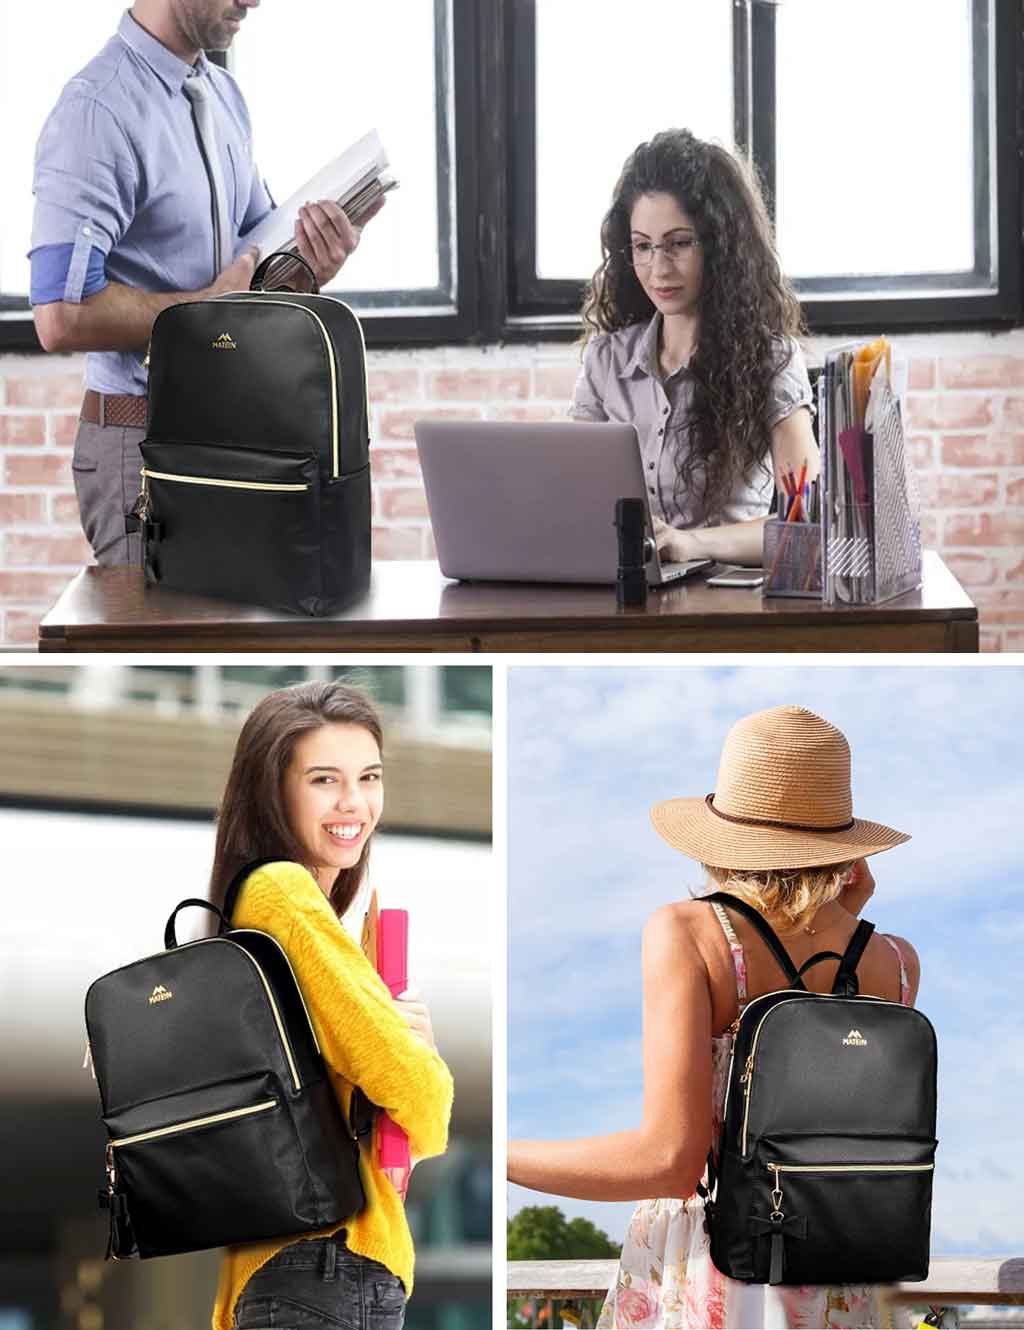 Matein PU Leather Backpack for Women Black